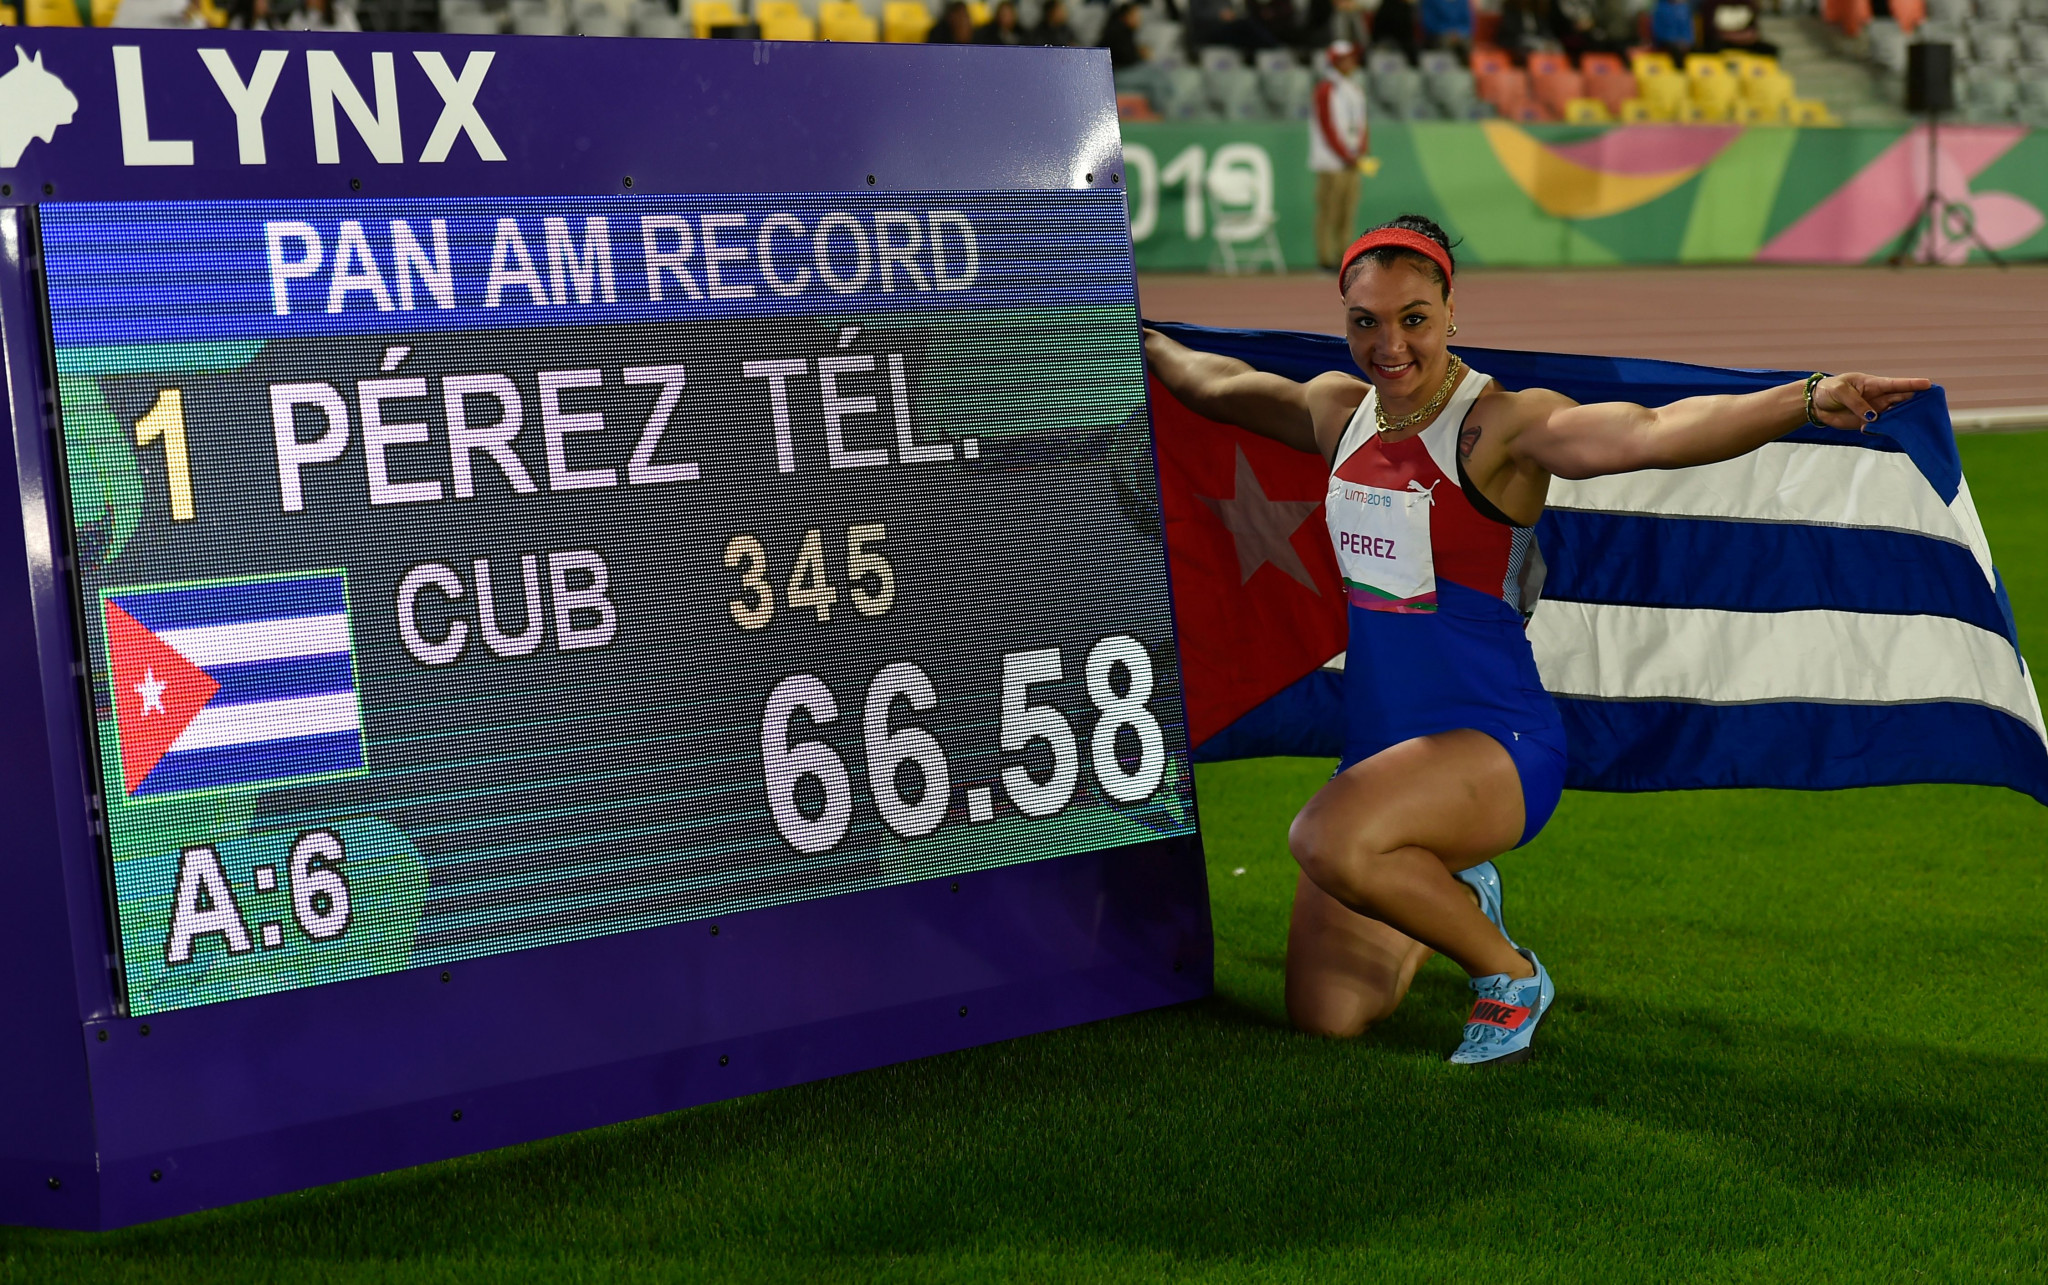 Cuba's Yaime Perez won the women's event after taking the lead with her final throw ©Getty Images